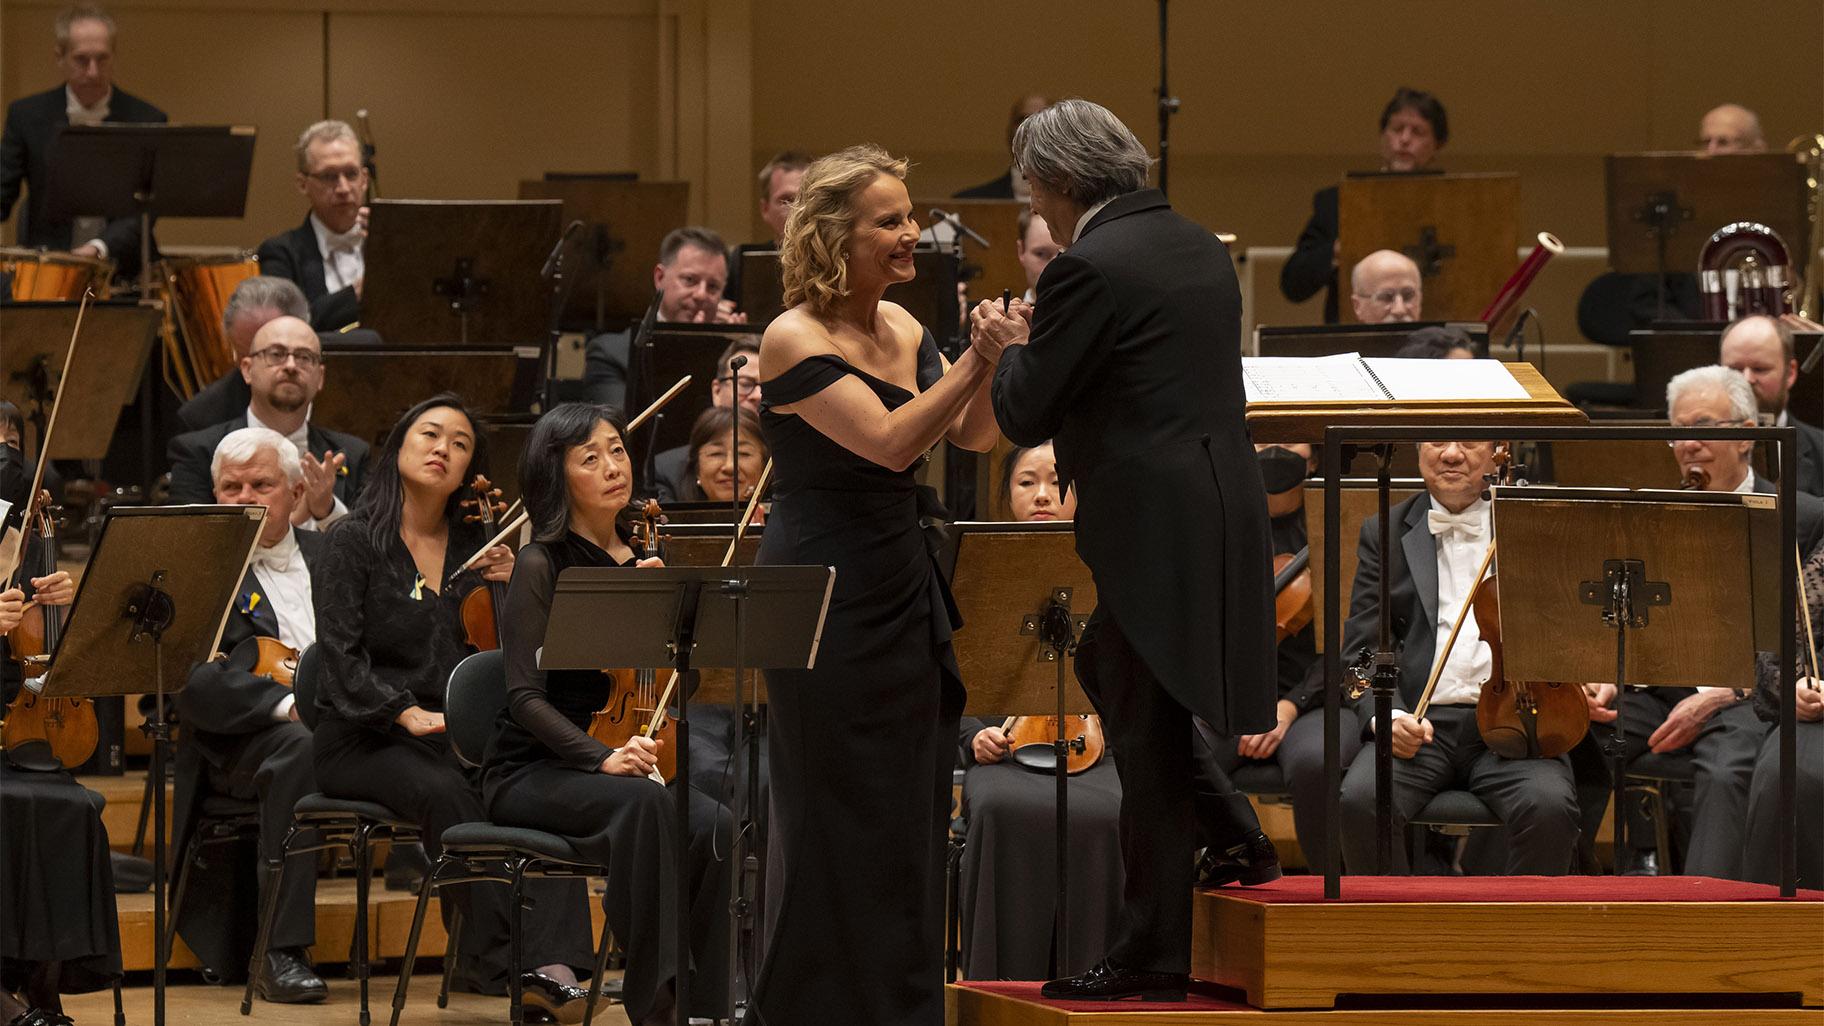 Zell Music Director Riccardo Muti acknowledges soloist Elīna Garanča following a performance of Mahler’s Rückert Lieder with the Chicago Symphony Orchestra. (Credit: Todd Rosenberg Photography)